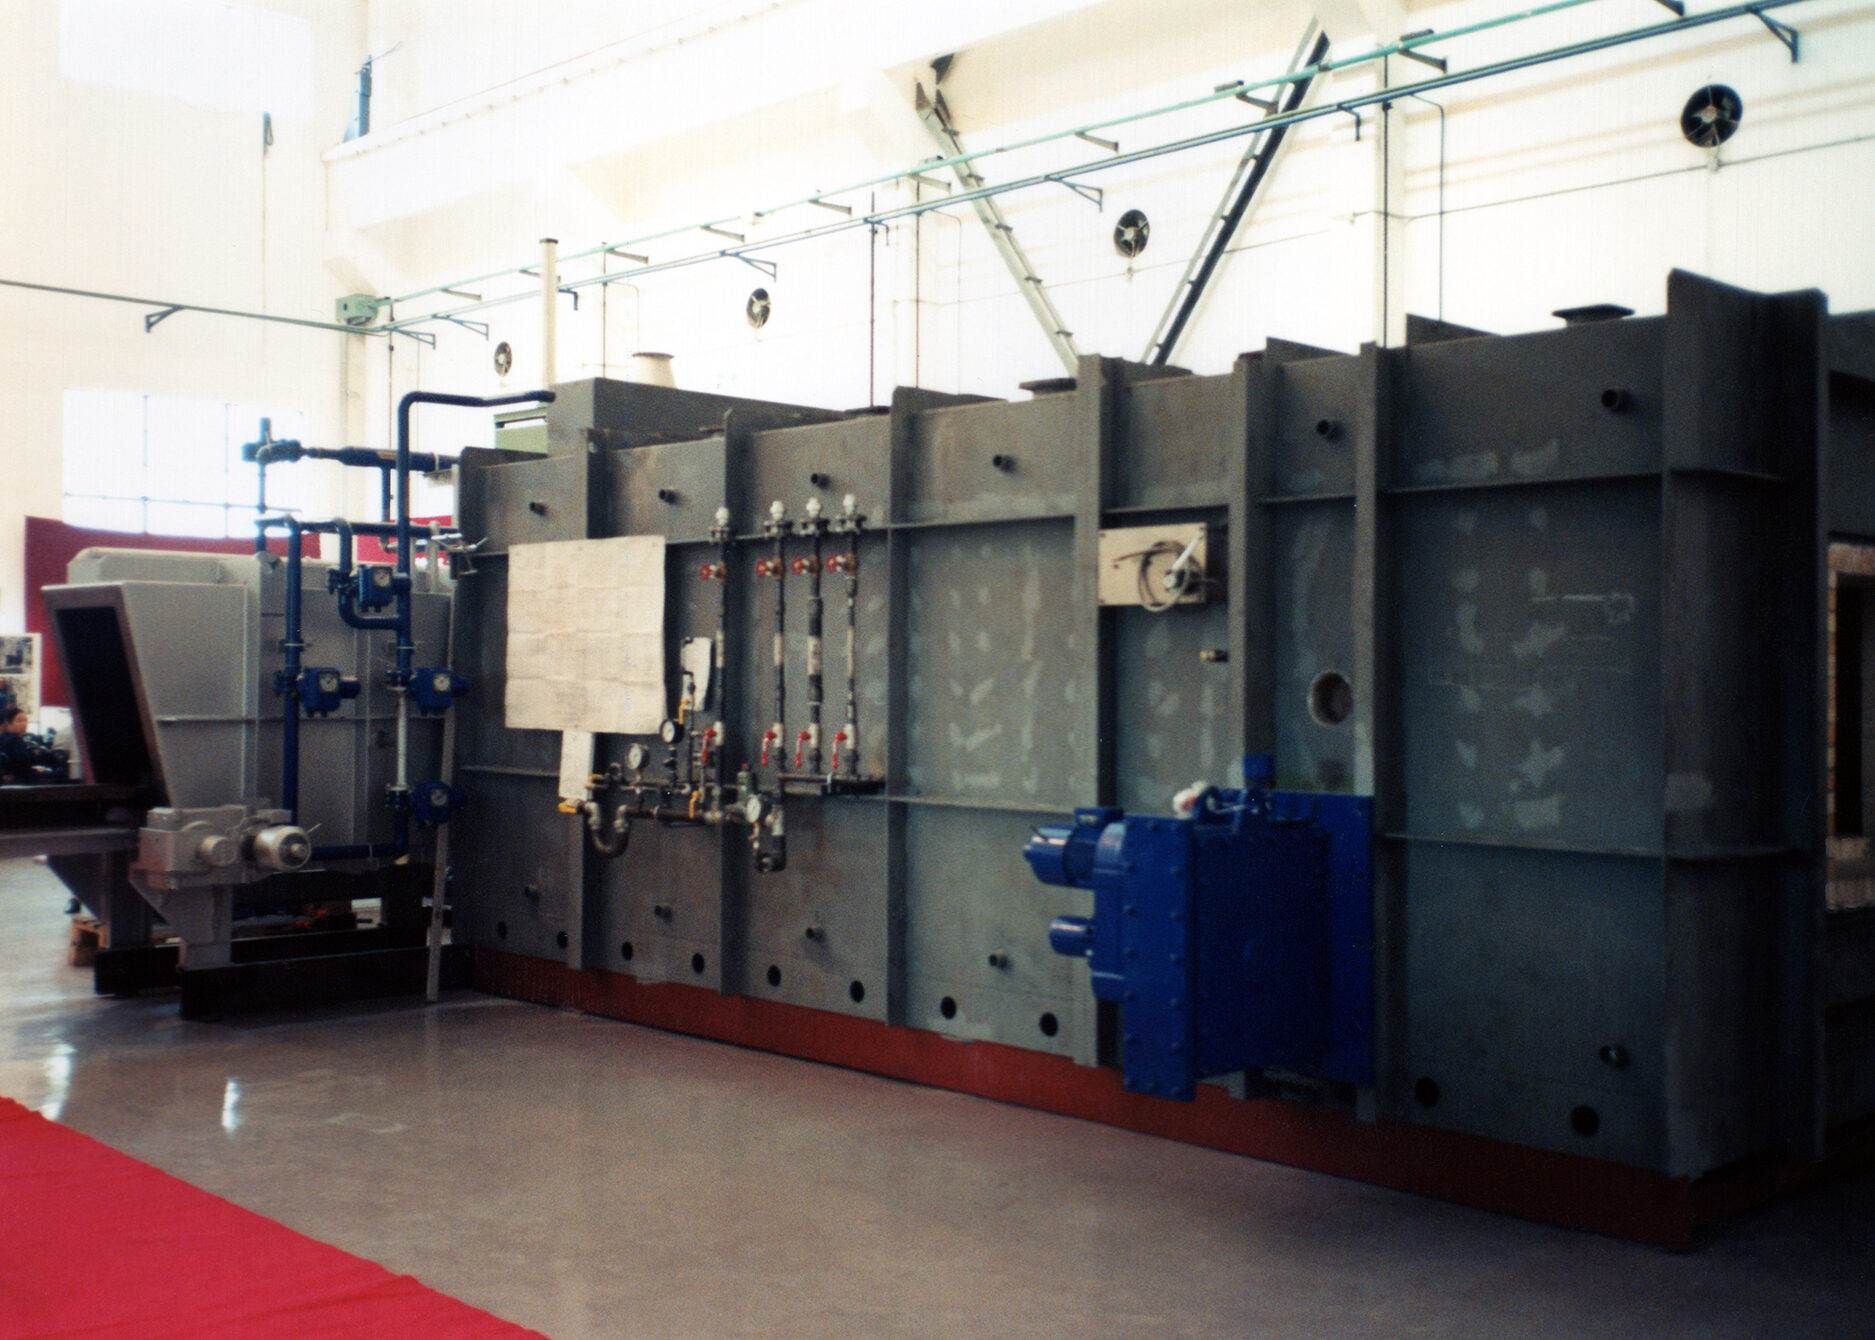 First continuous furnace line built by Ipsen China in 1997